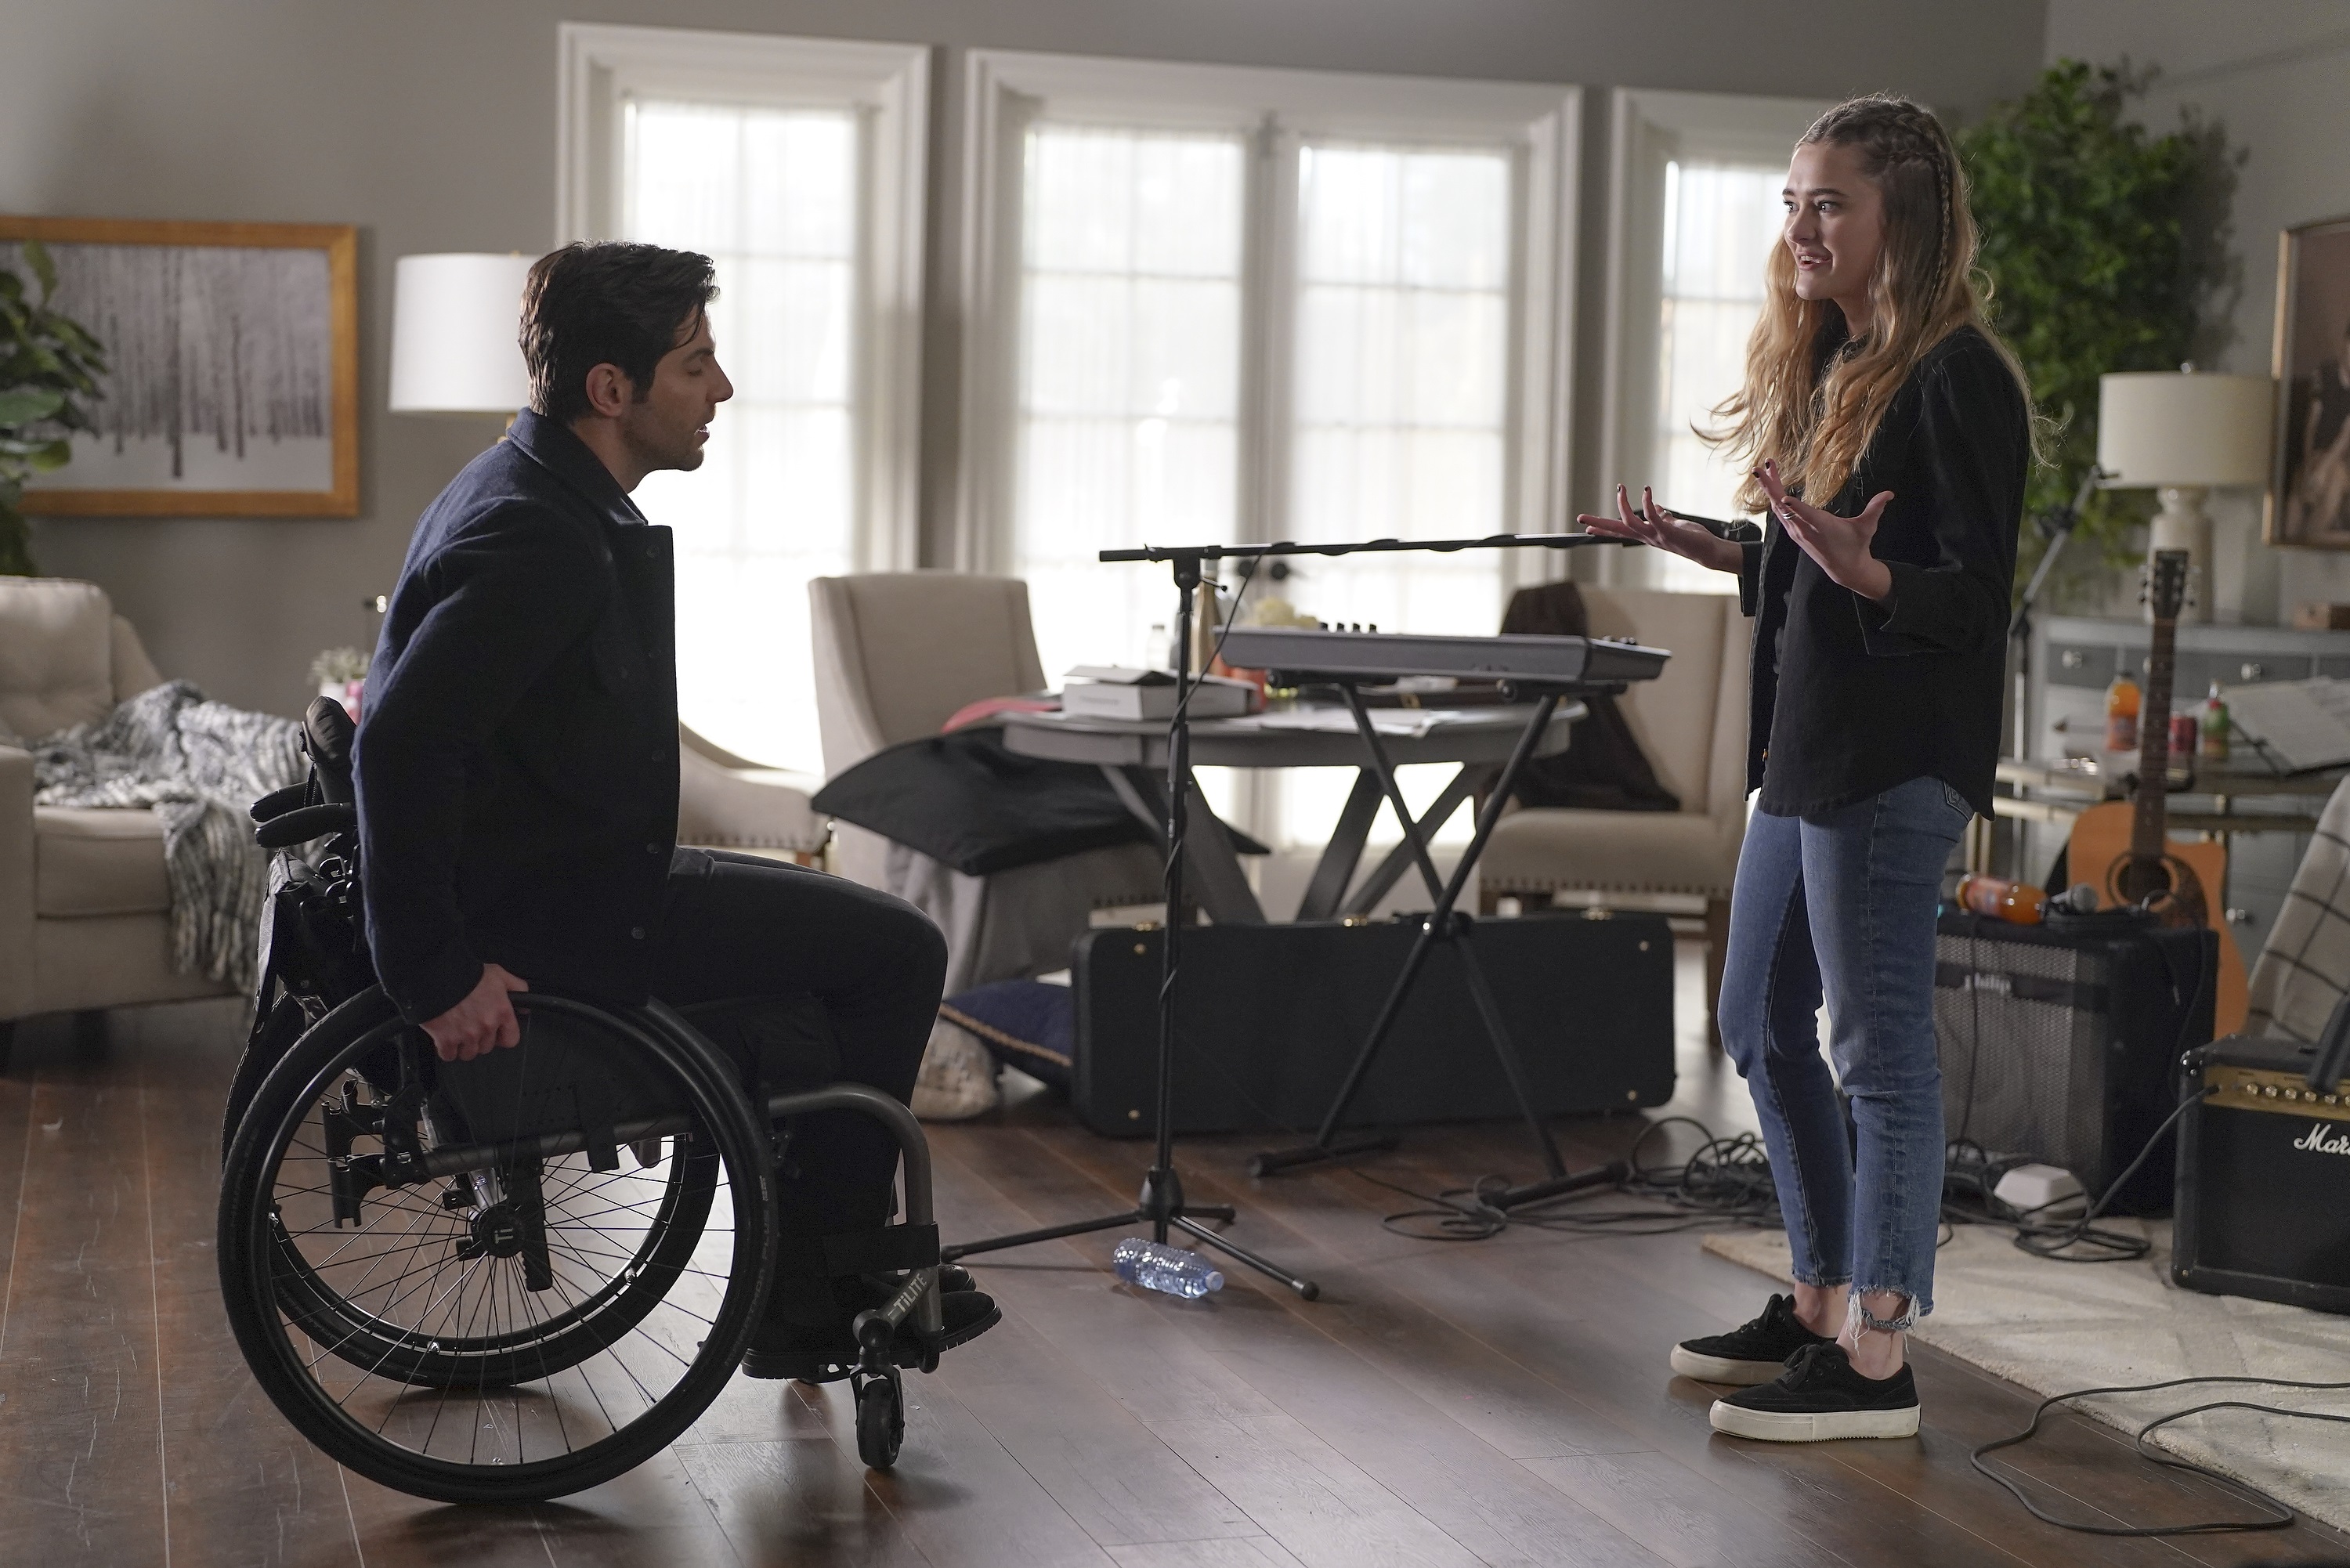 'A Million Little Things' cast members David Giuntoli and Lizzy Greene yelling at each other as Eddie and Sophie